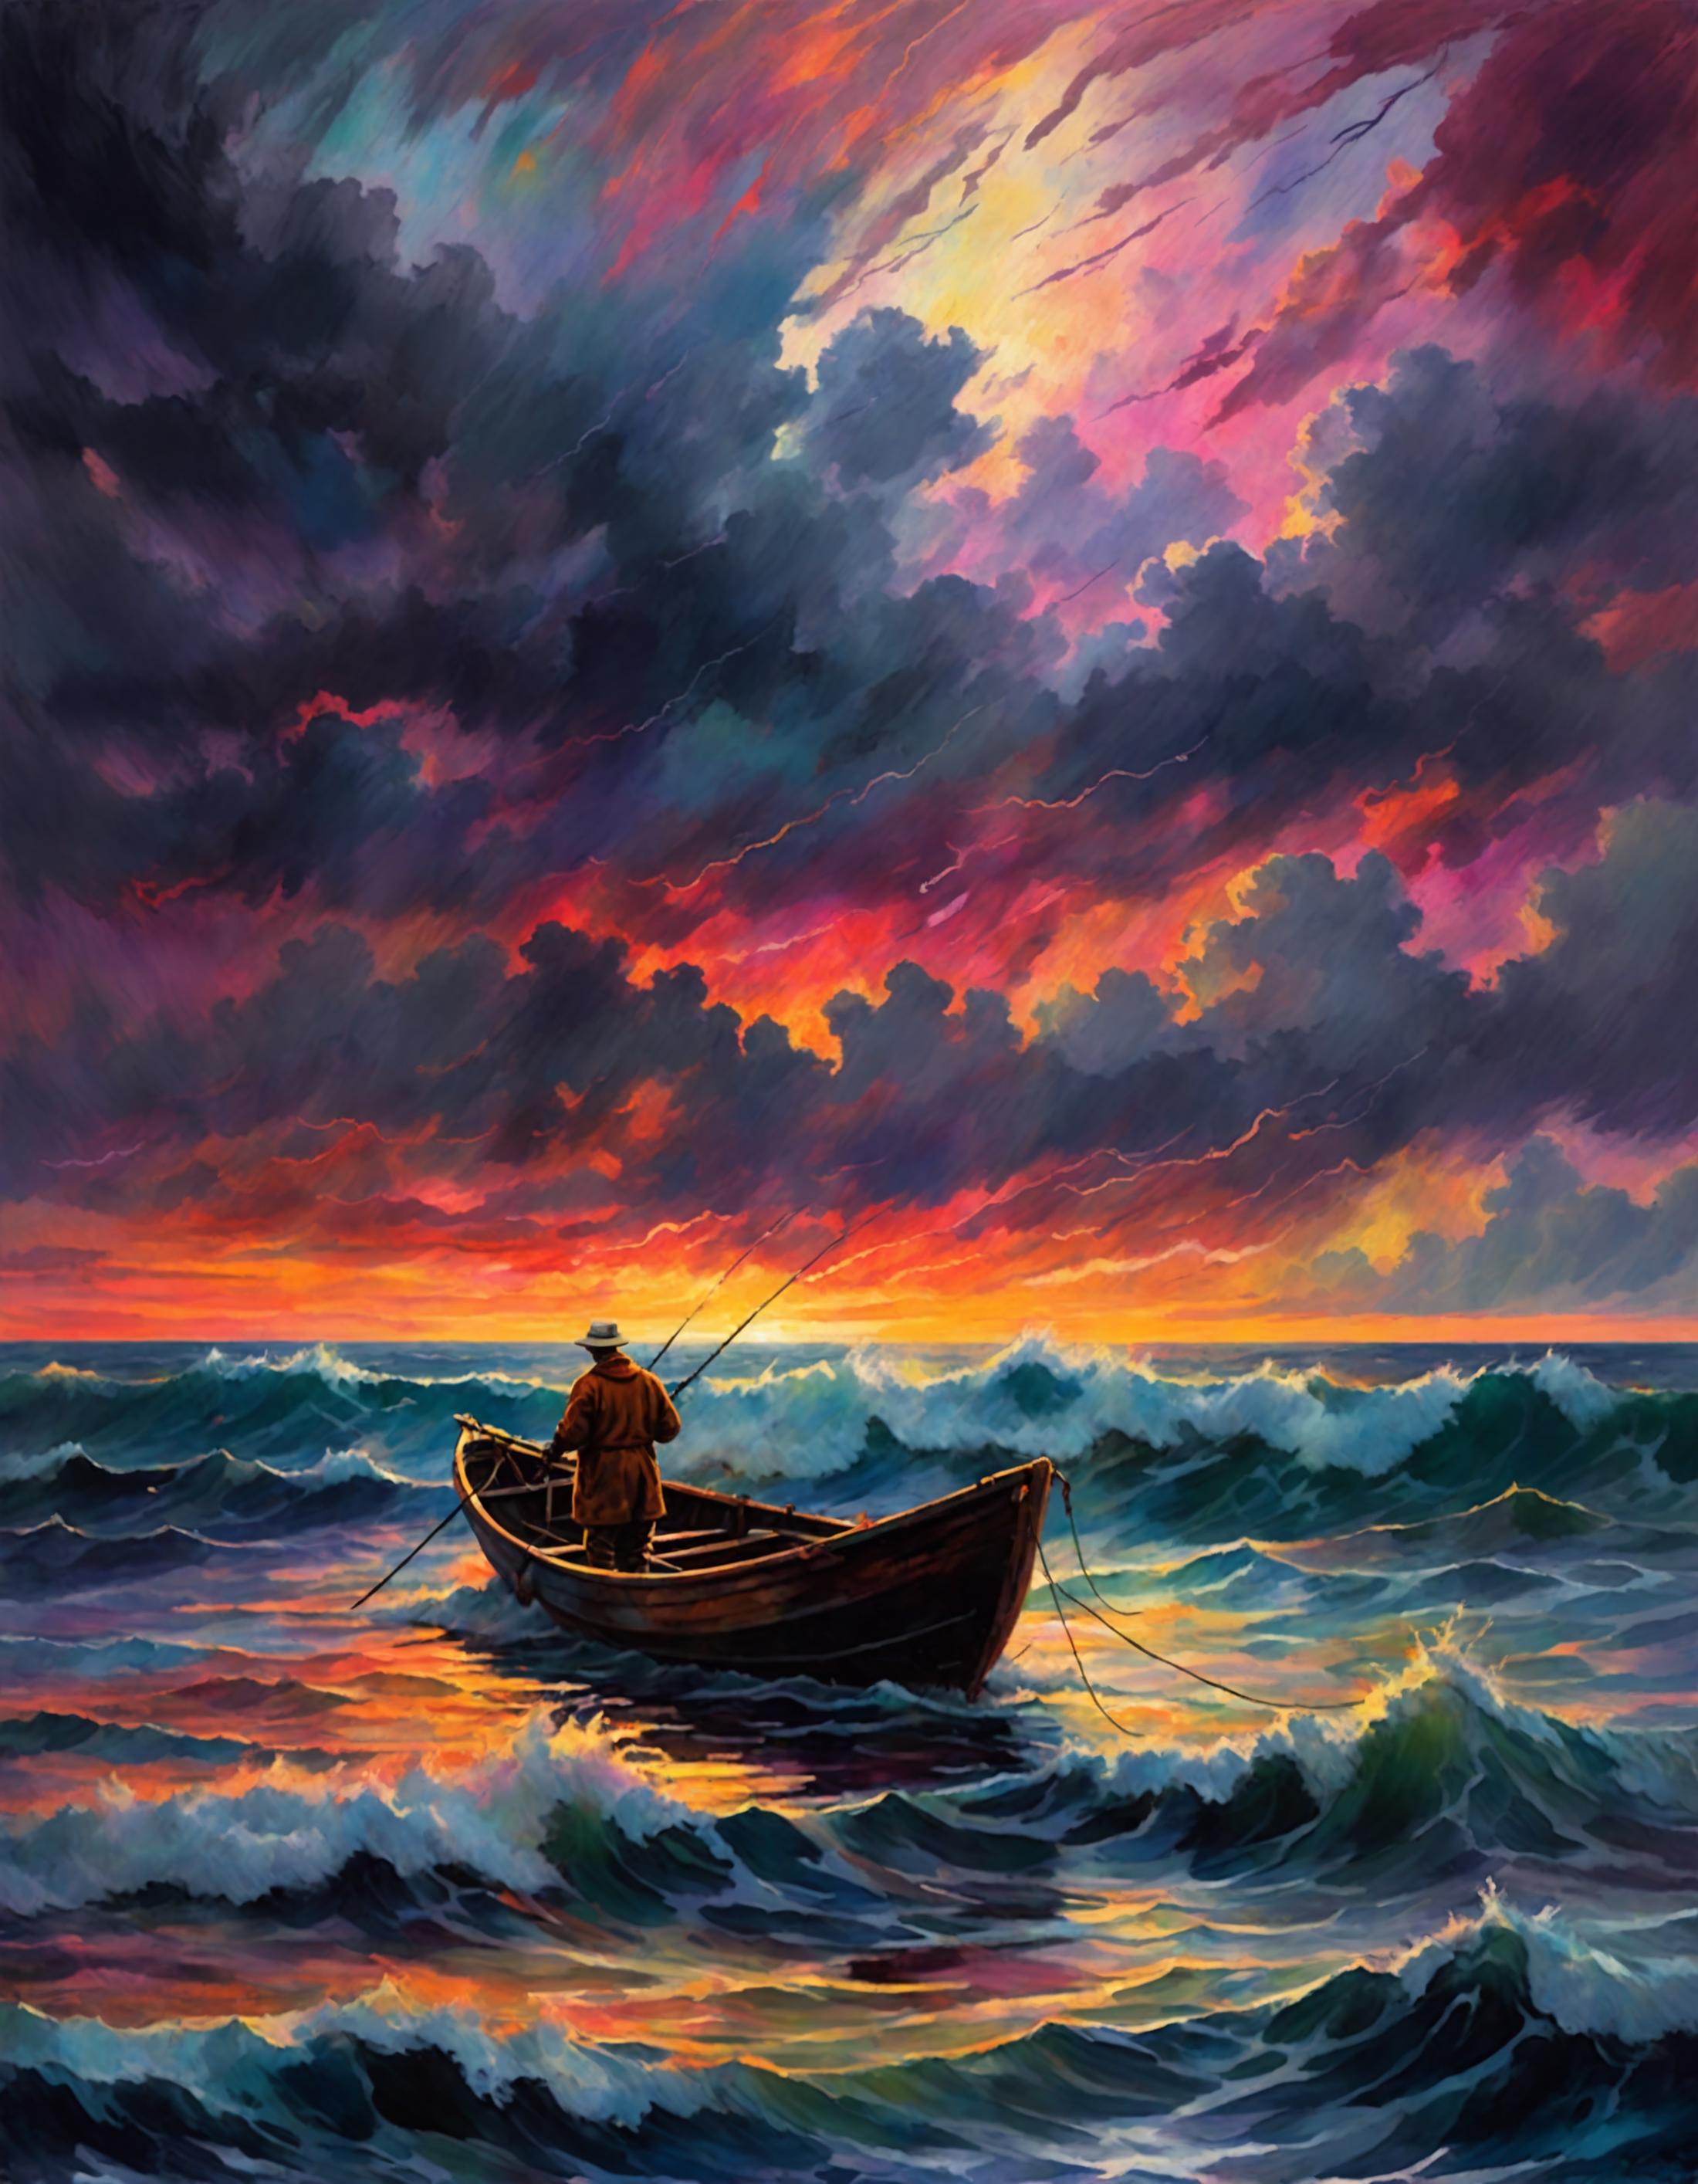 A man in a boat on a rough sea during a sunset.